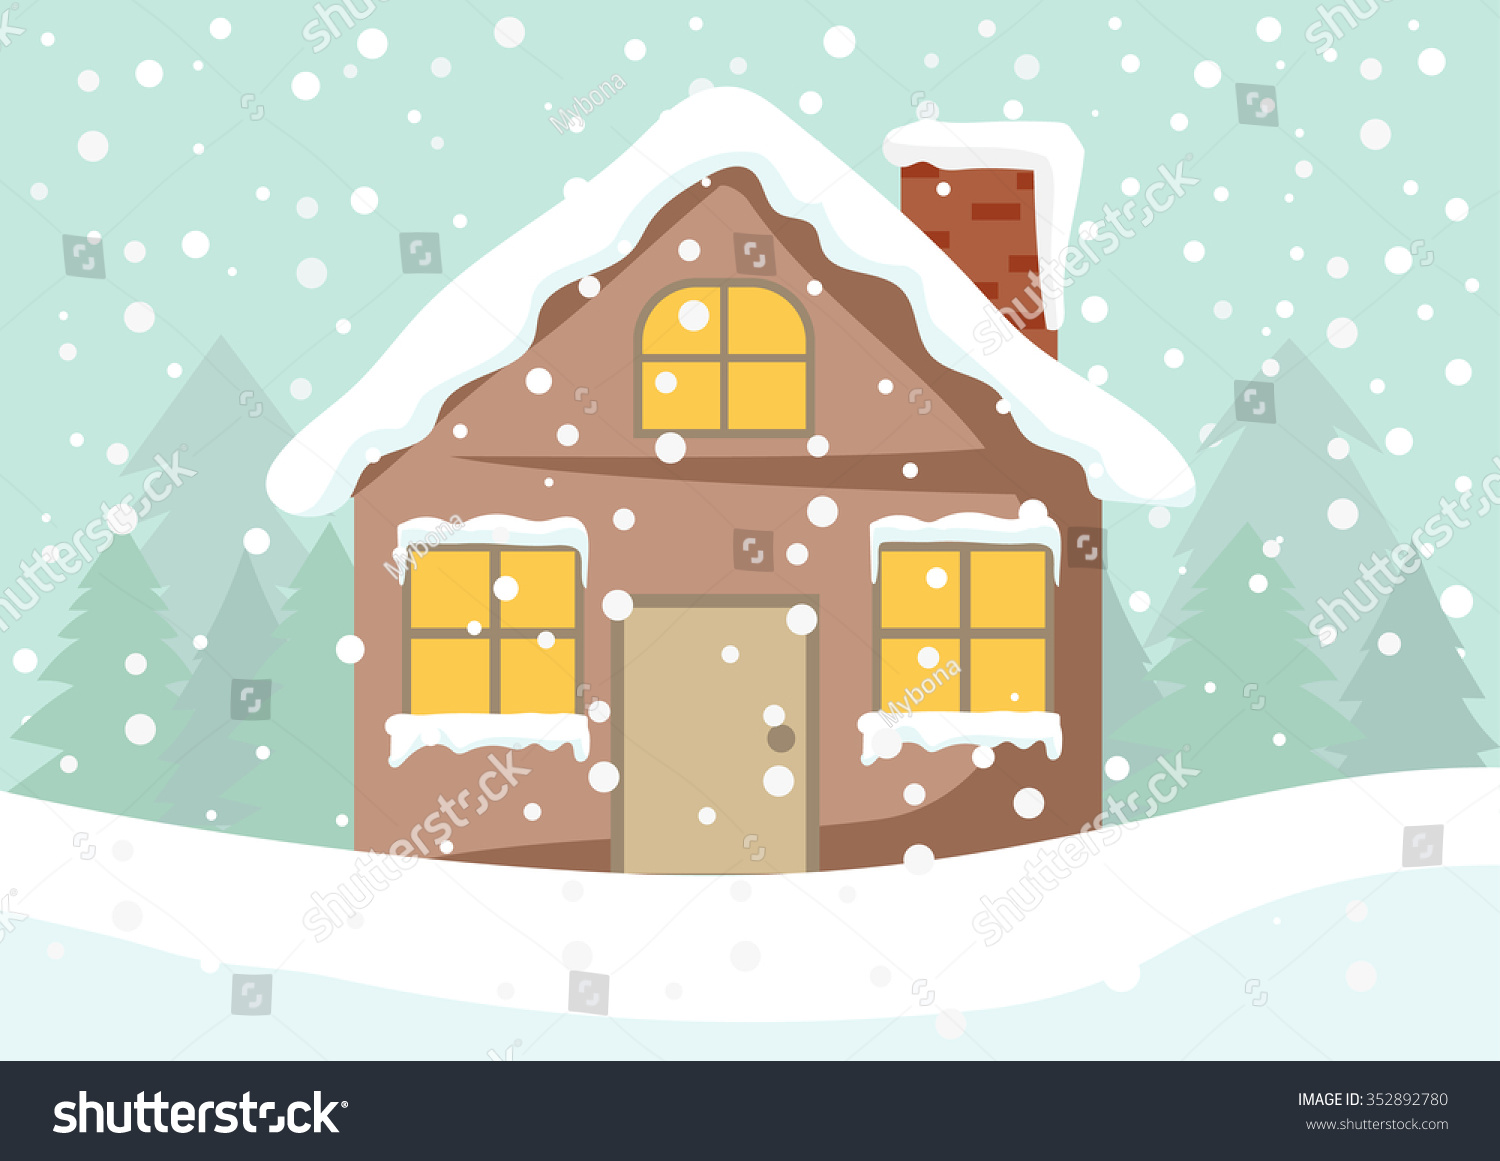 clipart house with snow - photo #4